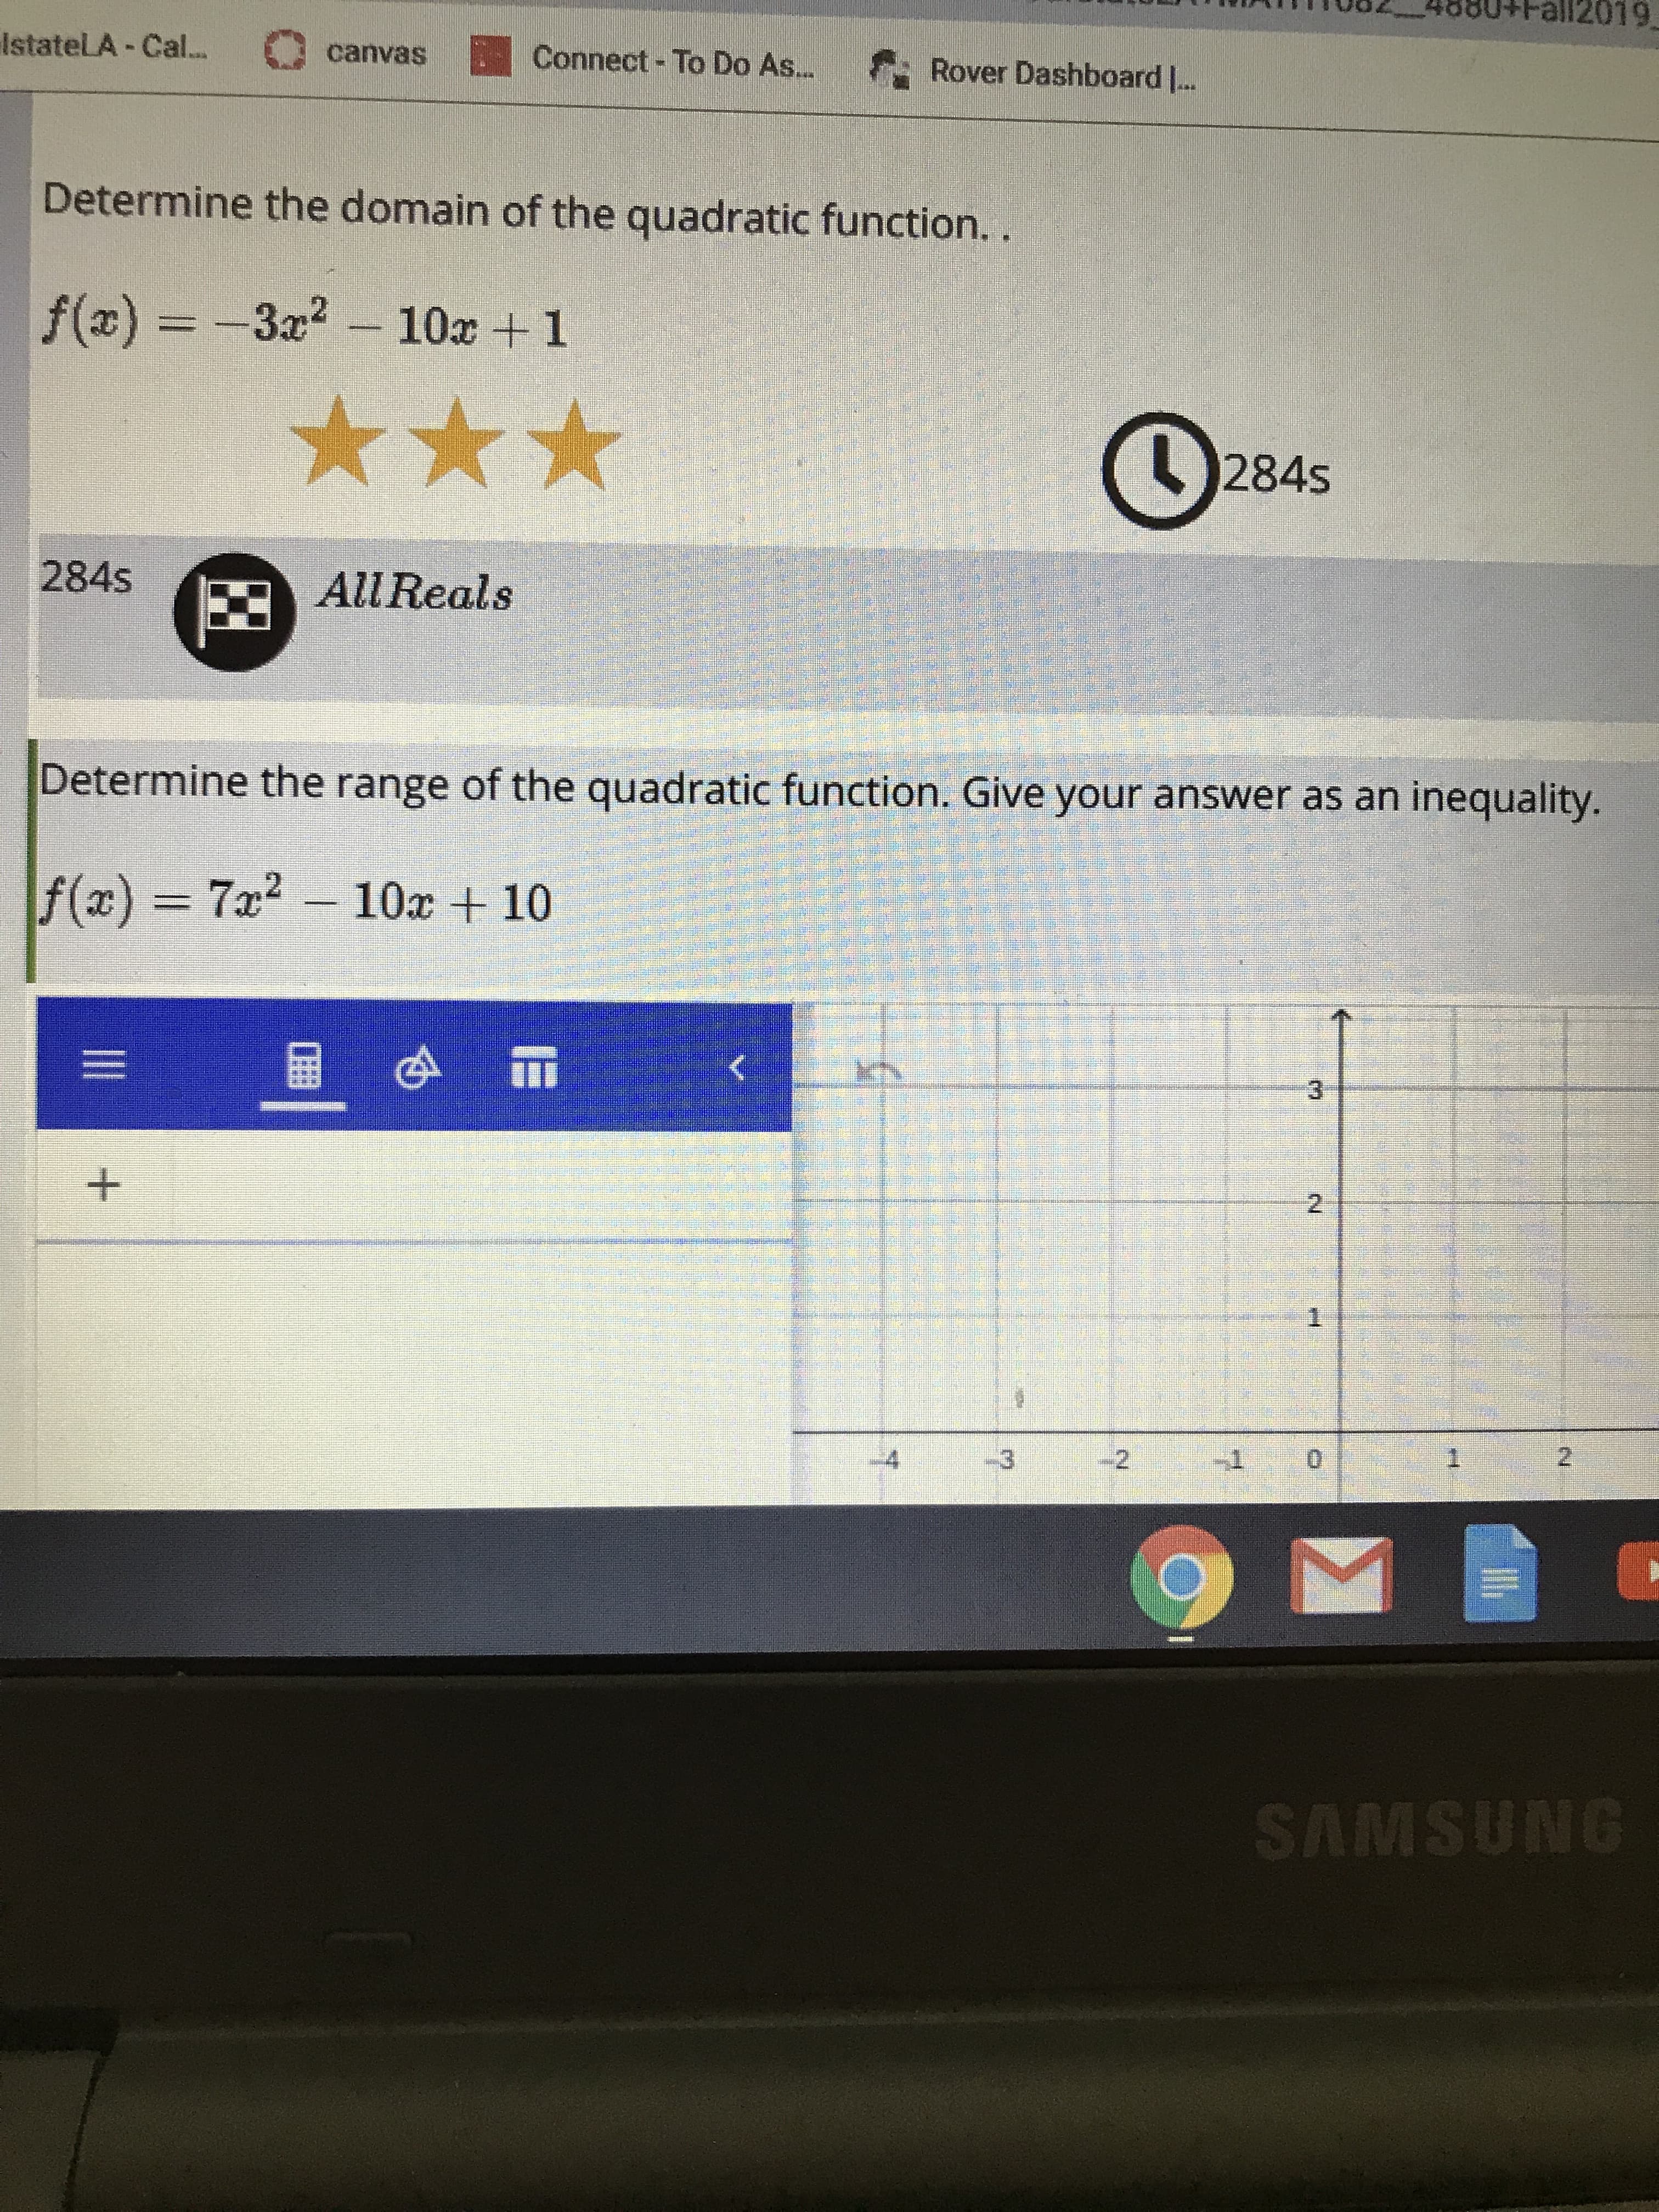 all2019
IstateLA Cal...
Connect-To Do As...
canvas
Rover Dashboard ..
Determine the domain of the quadratic function. .
f(x) =-3x2-10x 1
284s
284s
All Reals
Determine the range of the quadratic function. Give your answer as an inequality.
f(x) 7x2
10x 10
3
2
1
2
4
3
2
SAMSUNG
IE
II
+
